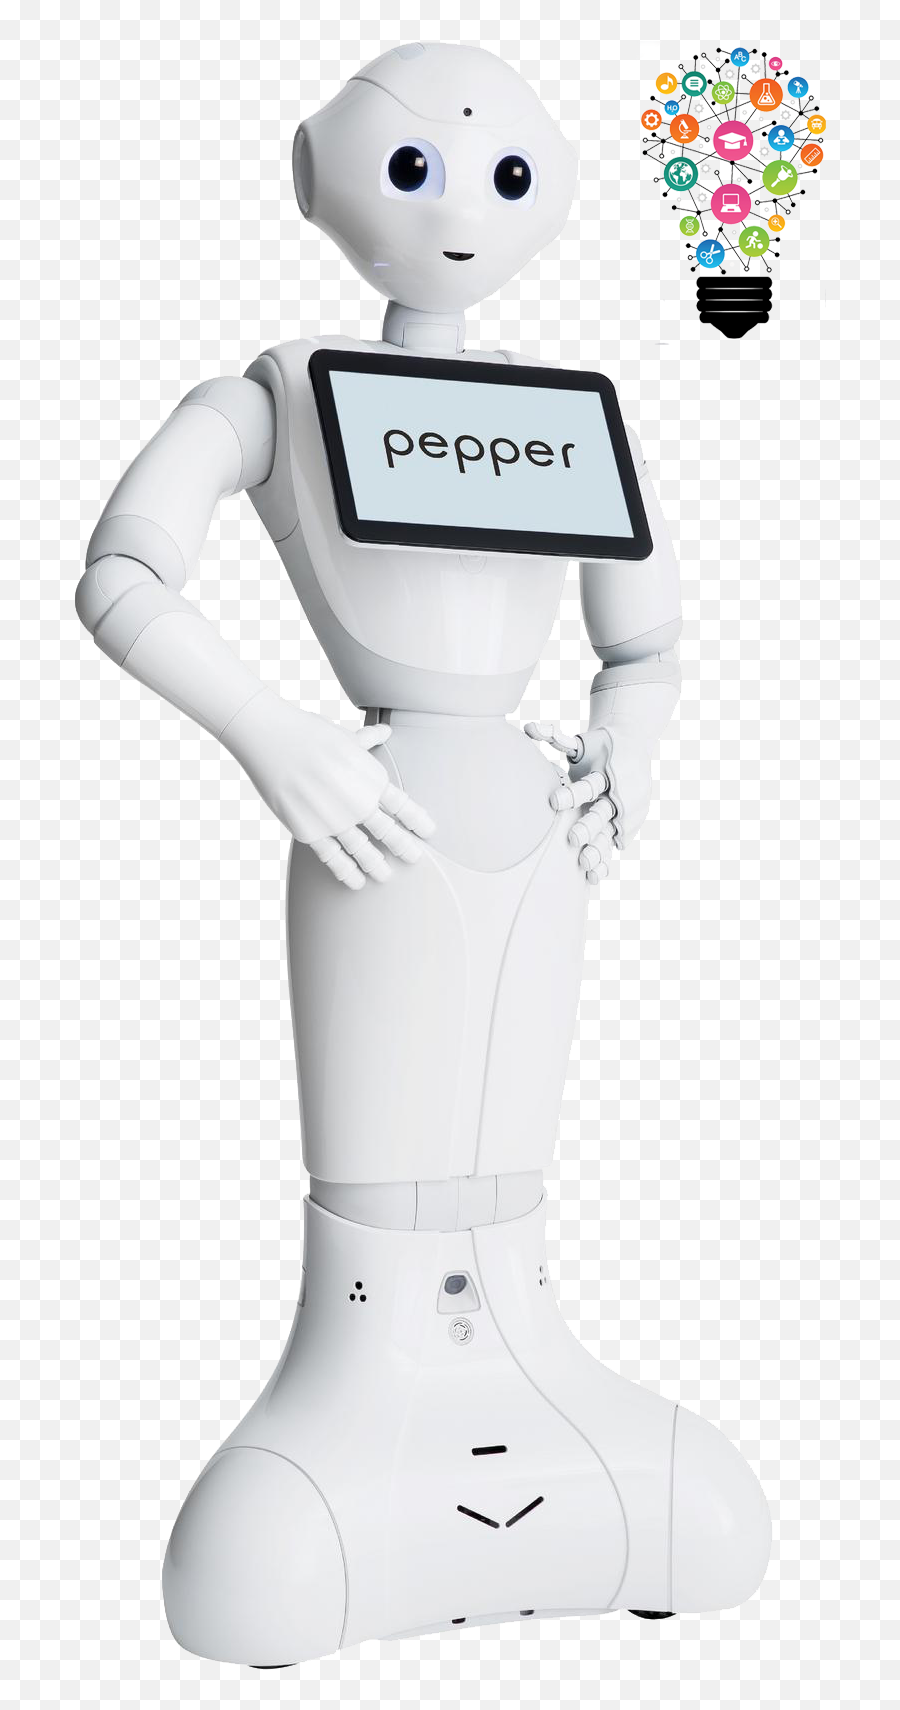 Pepper Robot For Research - Pepper Robot Emoji,Robot With Emotions